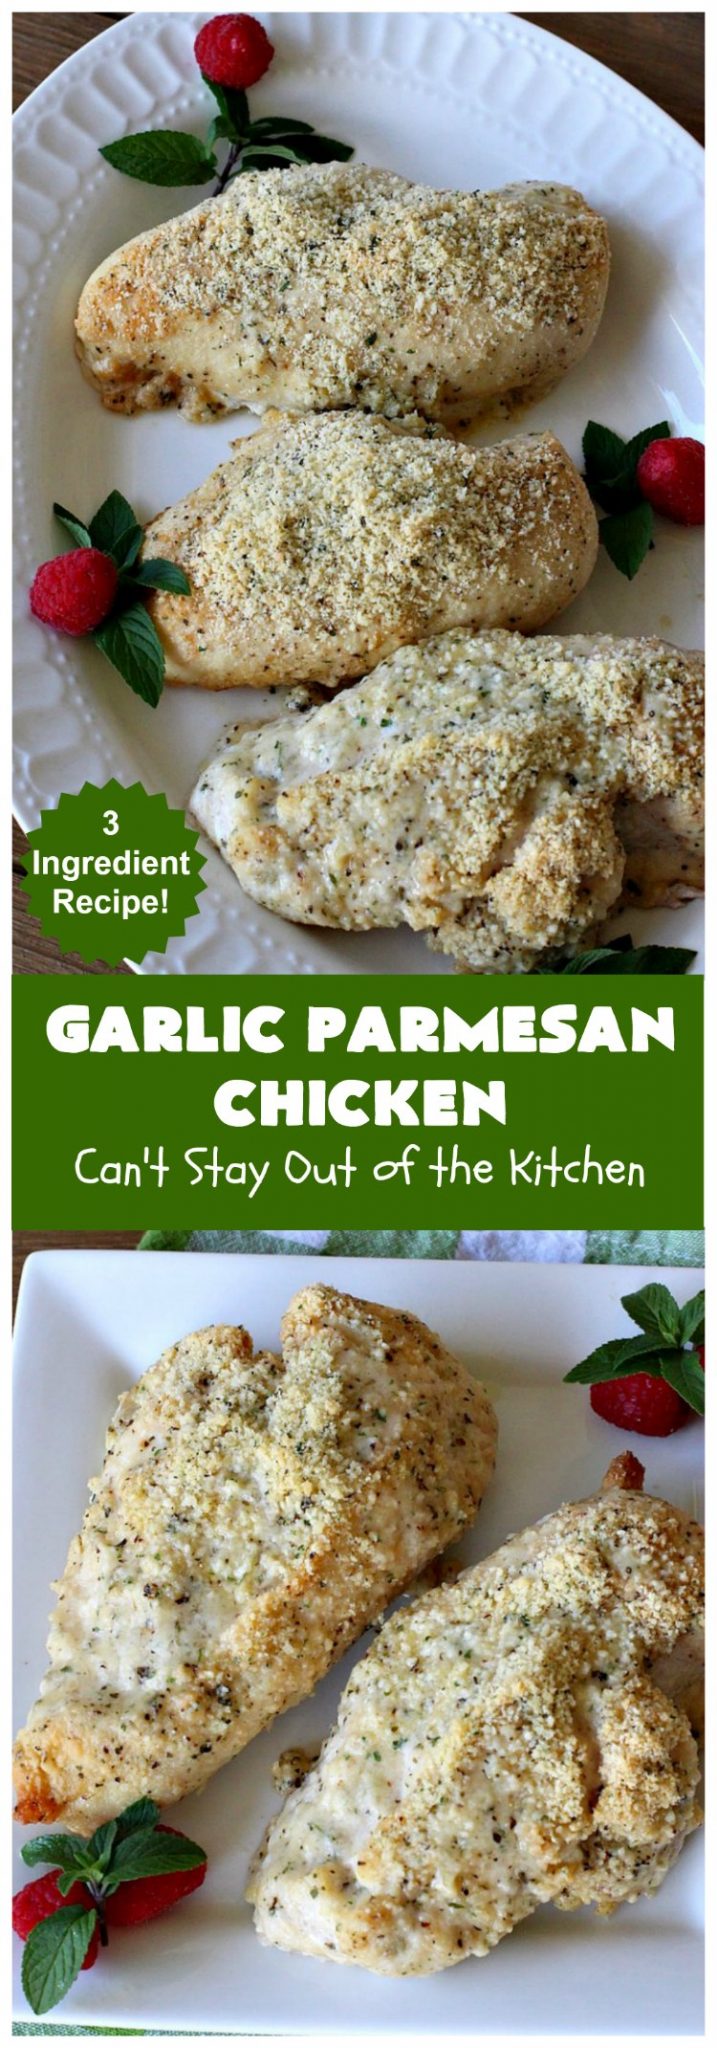 Garlic Parmesan Chicken – Can't Stay Out of the Kitchen